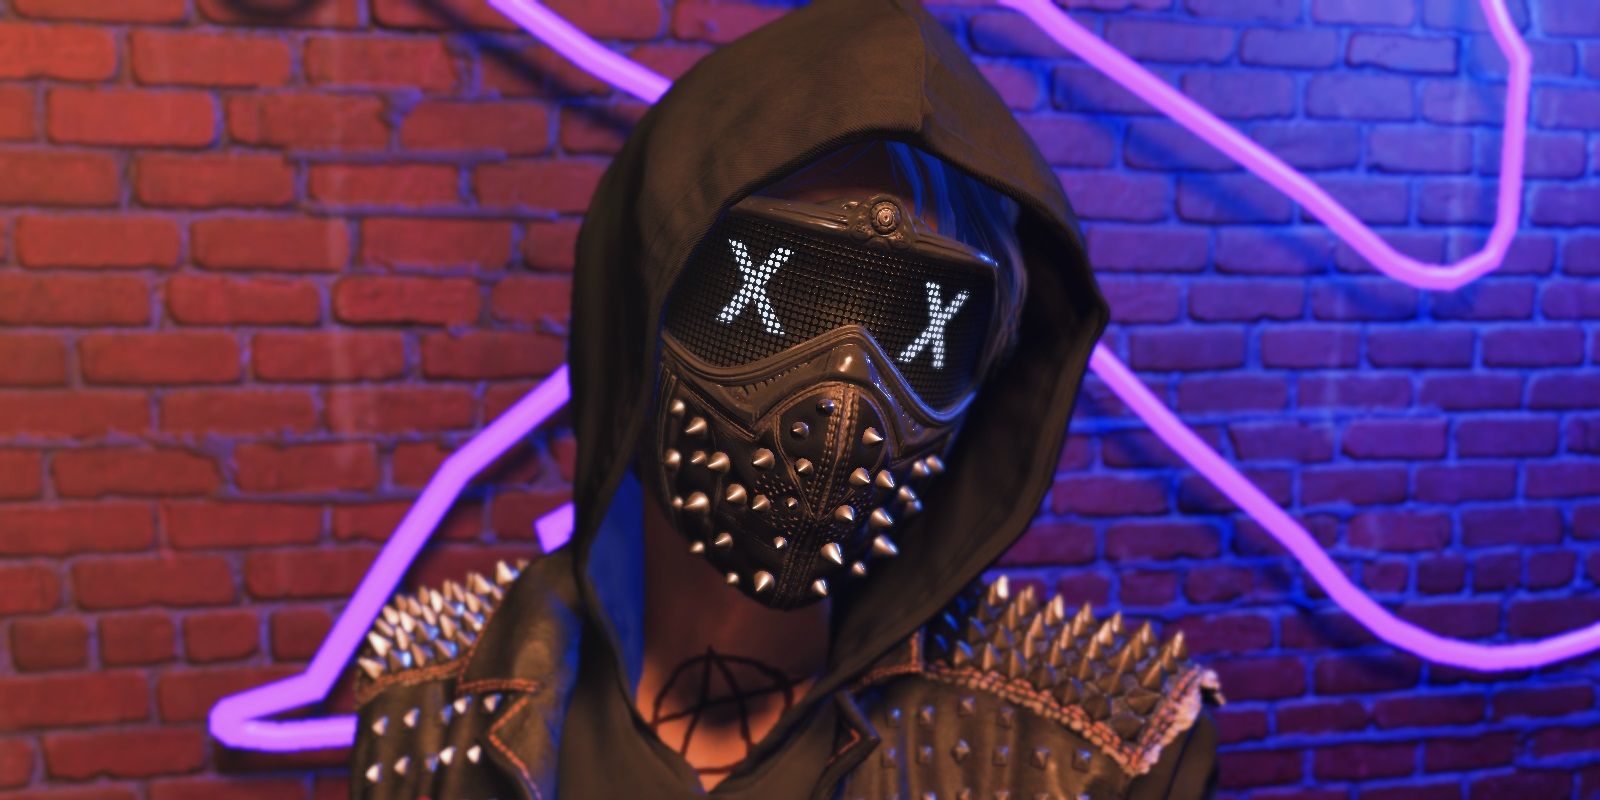 Watch Dogs 2's Wrench with mask on and with a neon-lit brick background